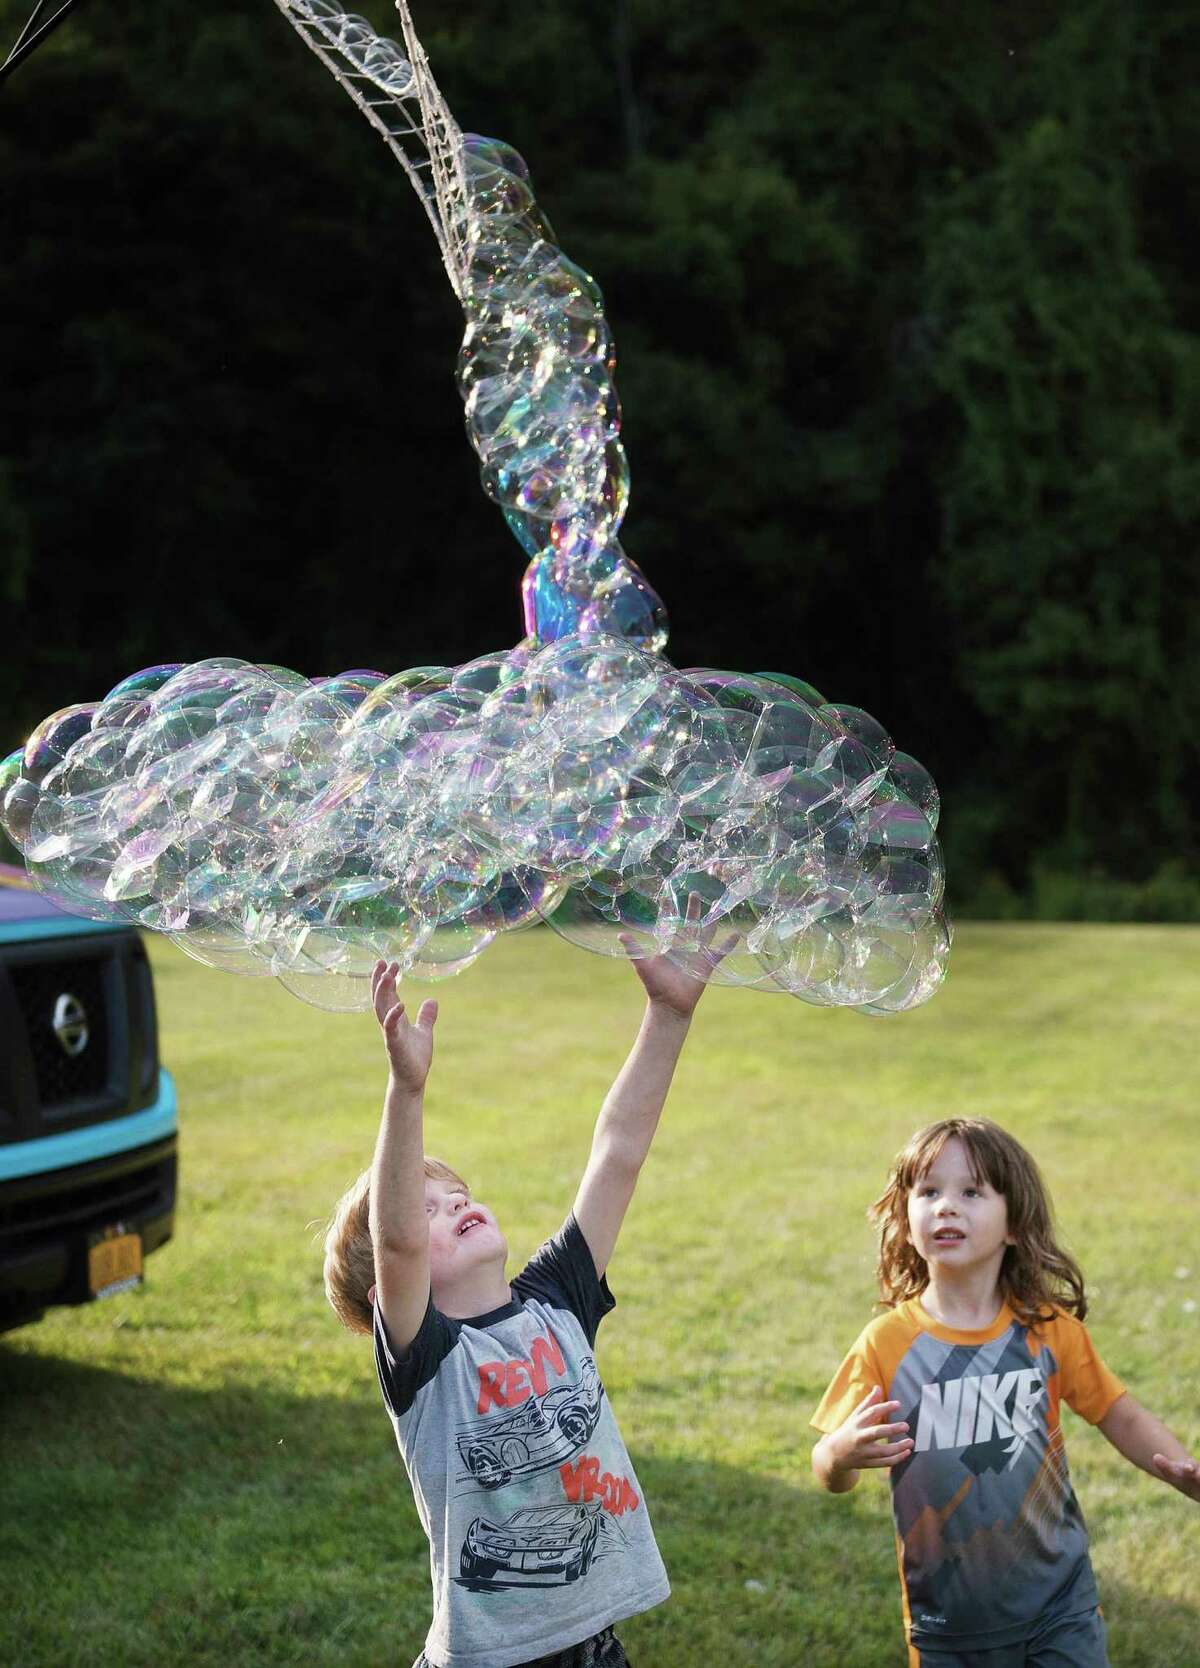 Colin McLaughlin catches bubbles during the Barlow Mountain back-to-school social Friday, Aug. 30.